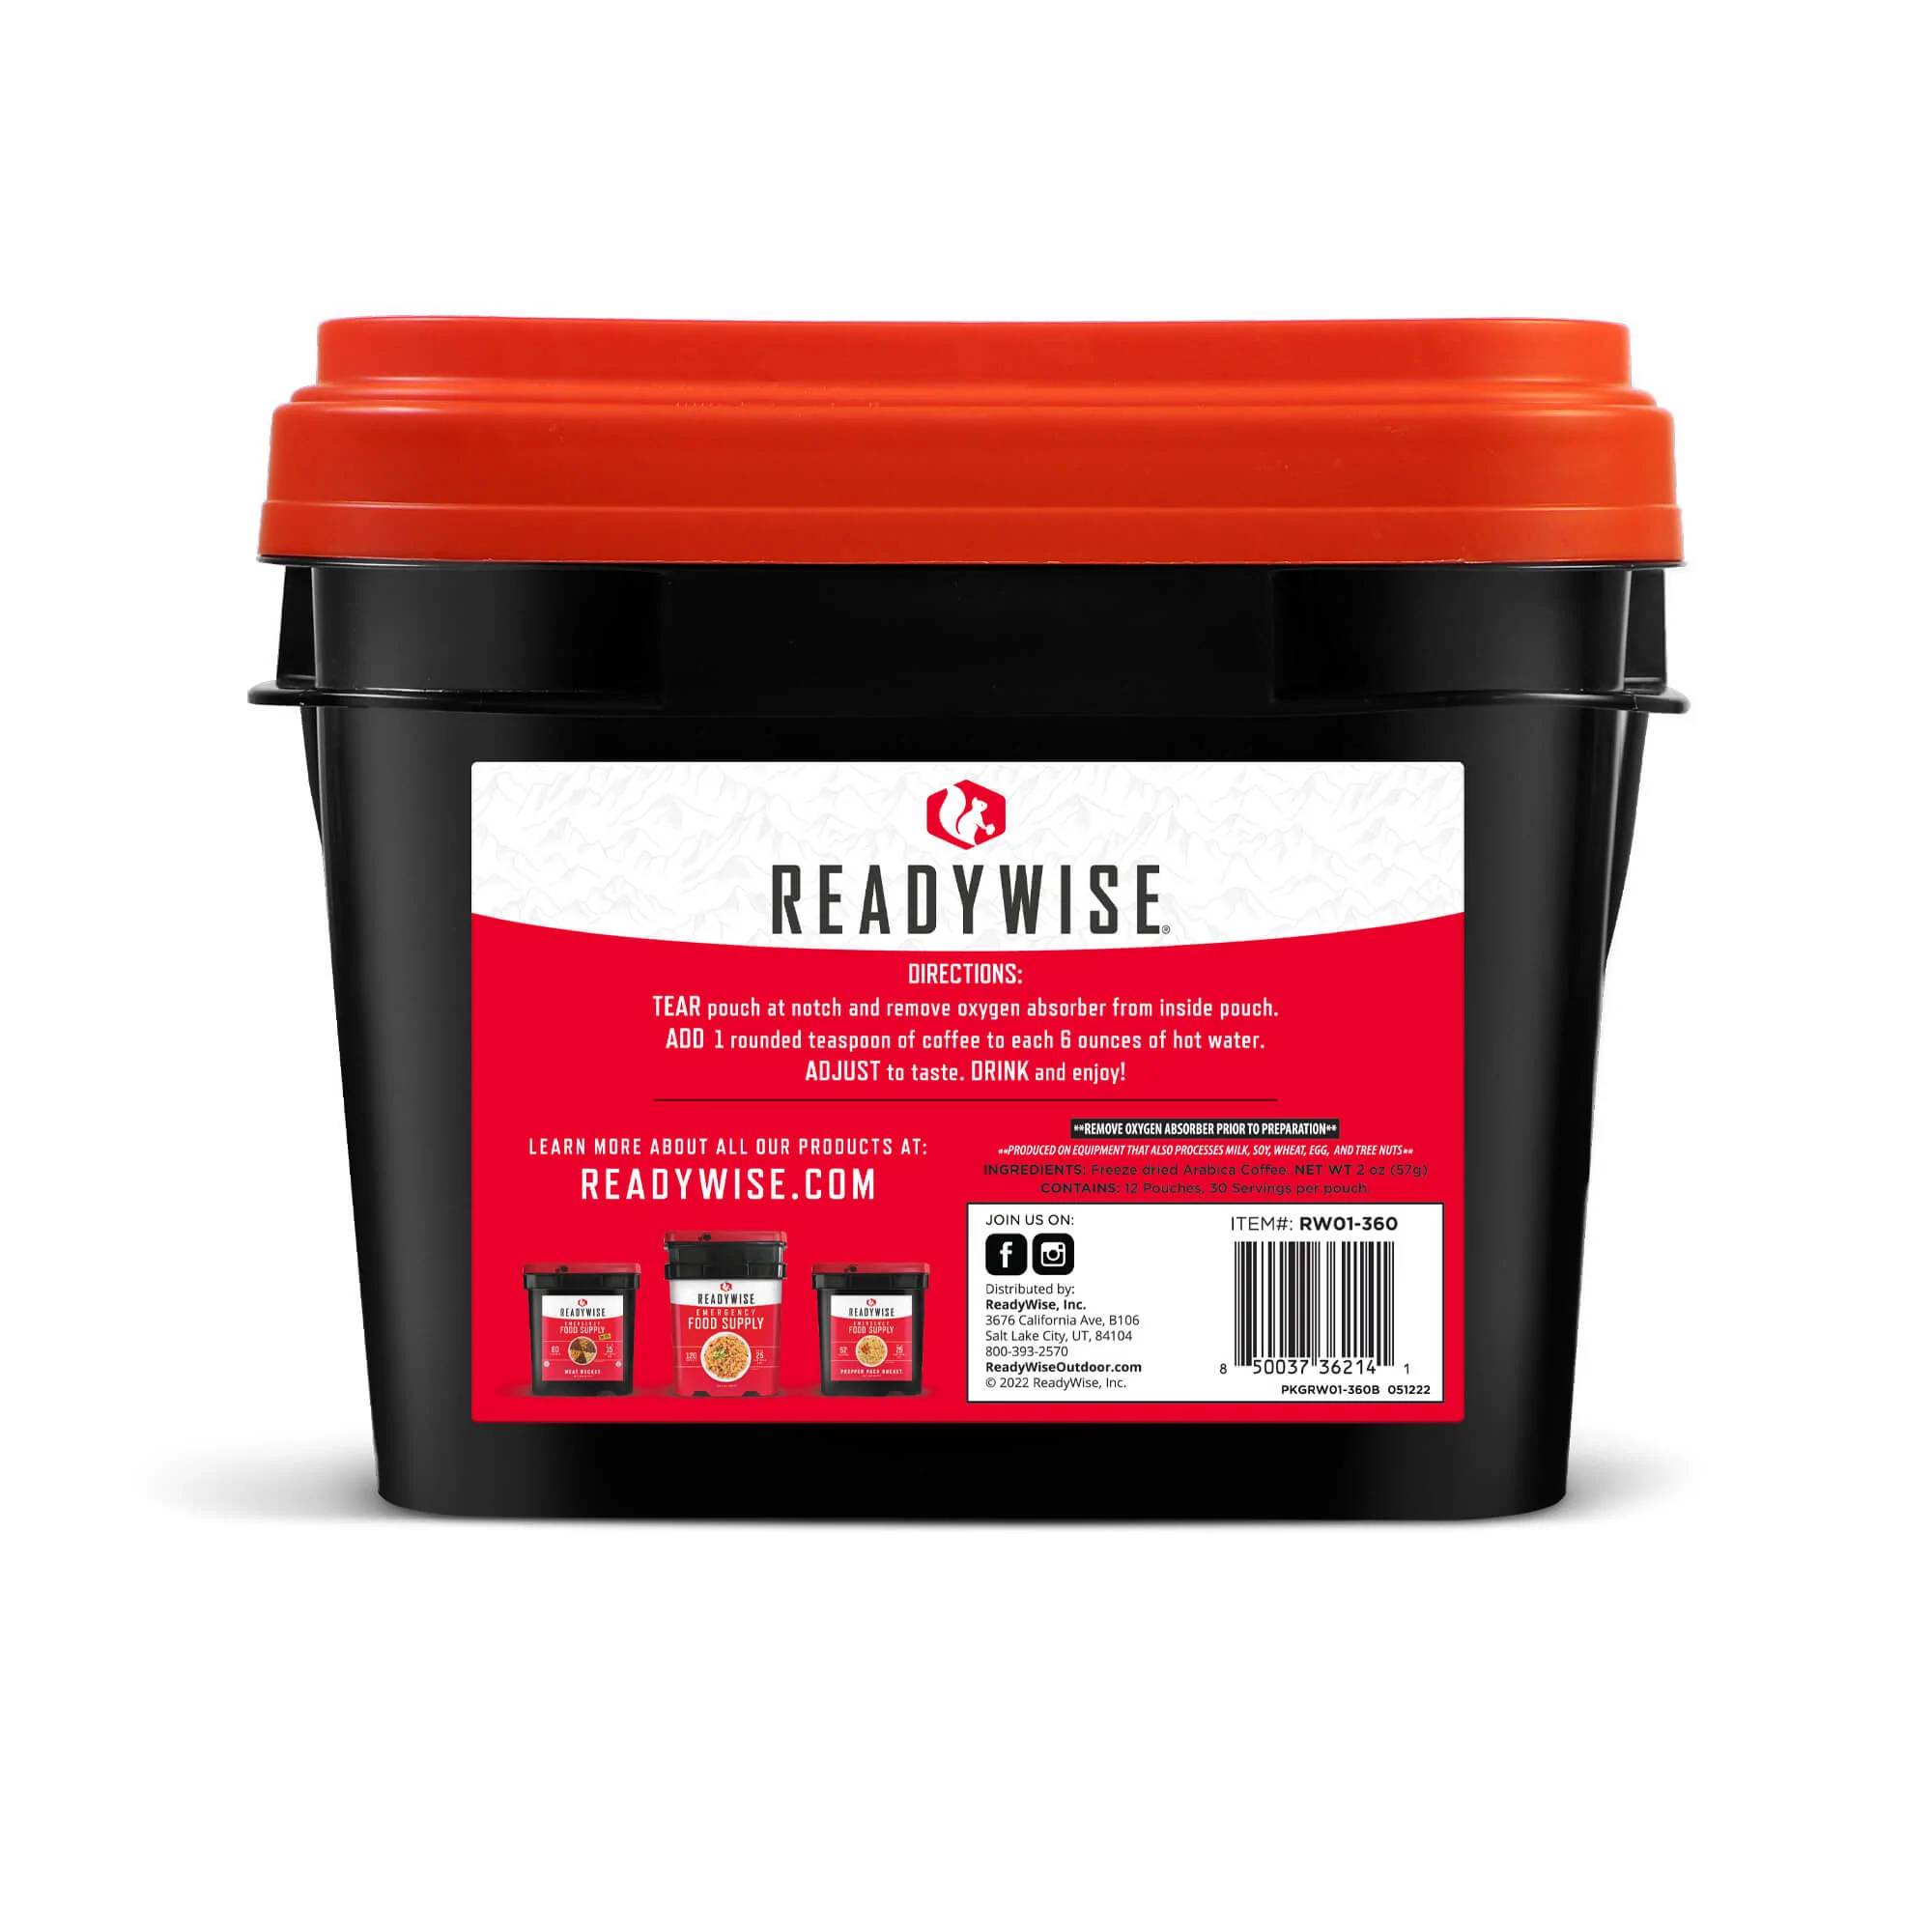 A bucket of ReadyWise lubricant on a white background.